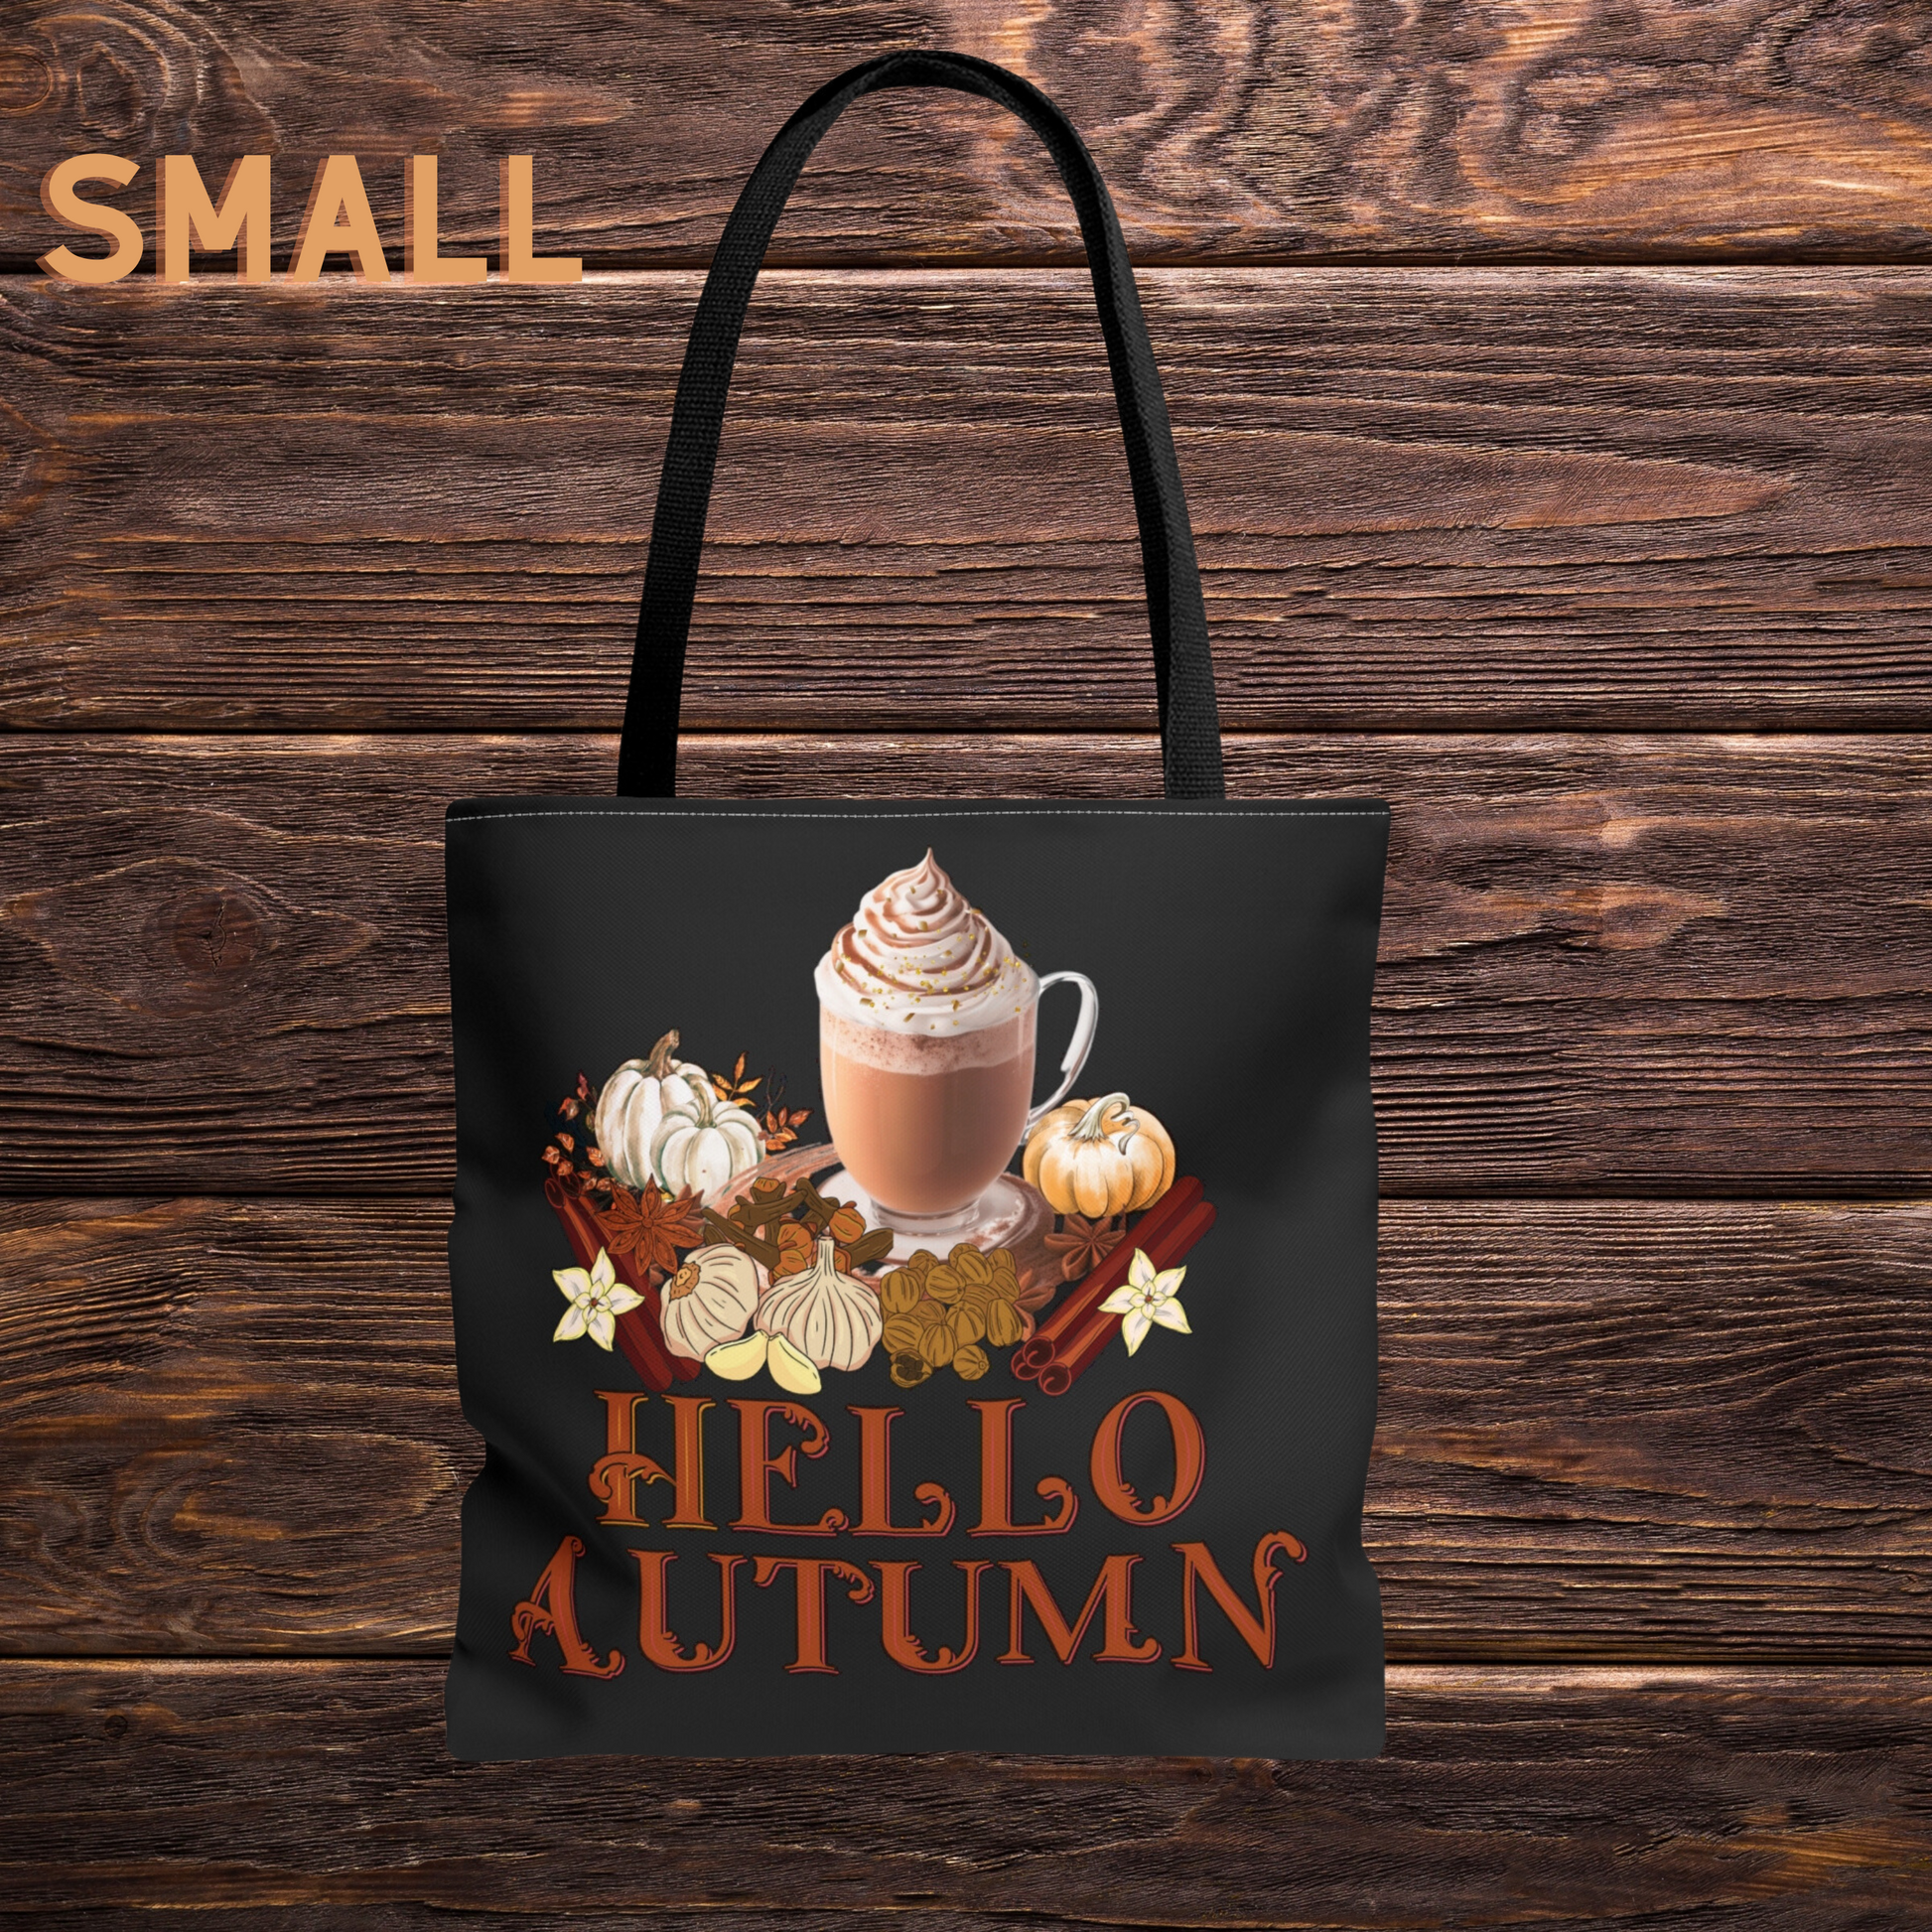 Pumpkin Spice Latte Spices Tote Bag - Fall Fashion, Hello Autumn - Cute Polyester Tote Bag, Perfect Gift for Birthdays and Fall Bags   